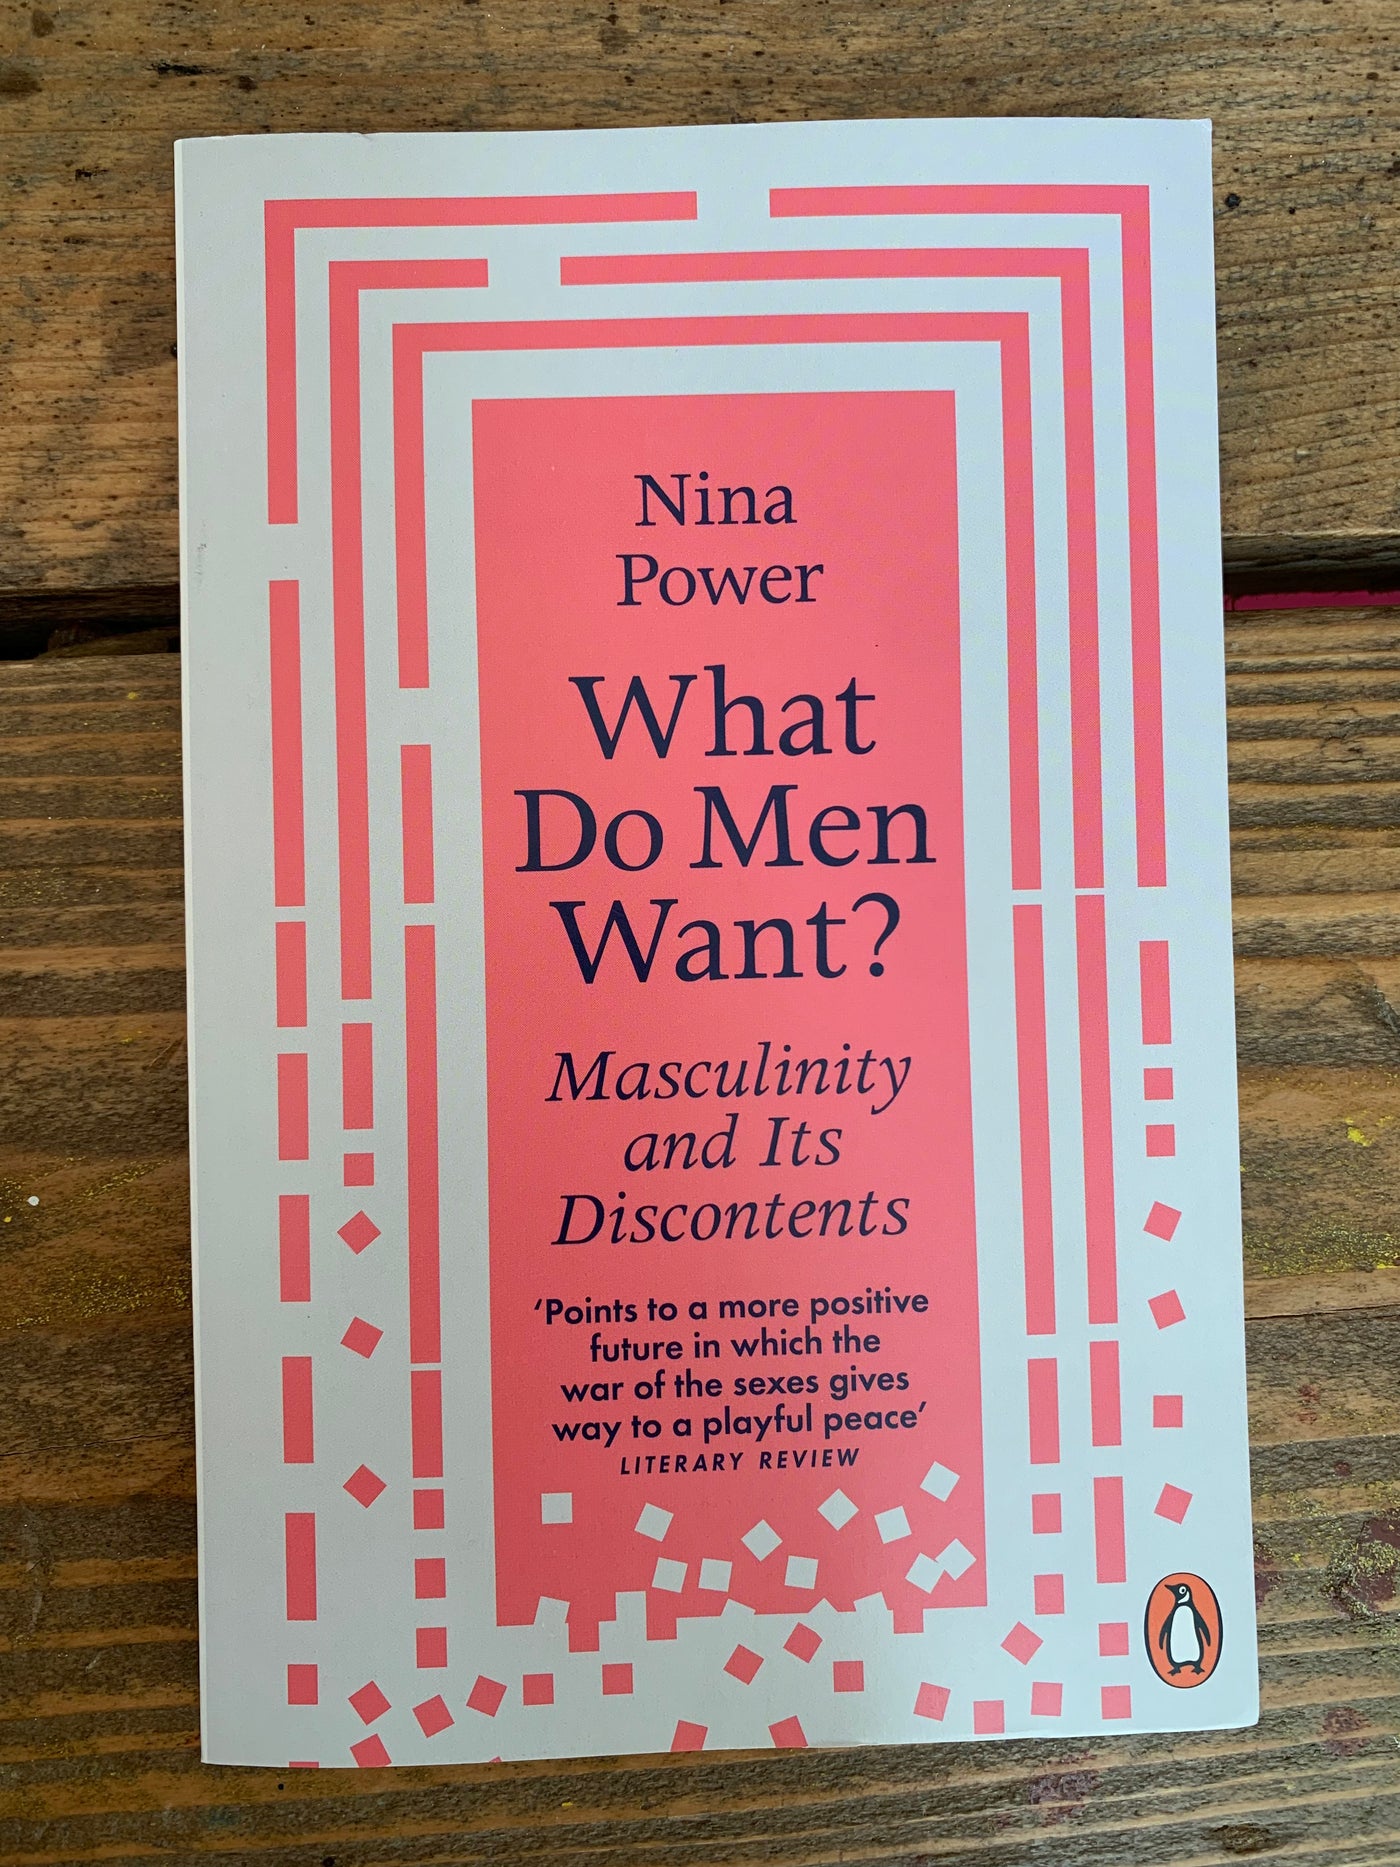 What Do Men Want? : Masculinity and Its Discontents